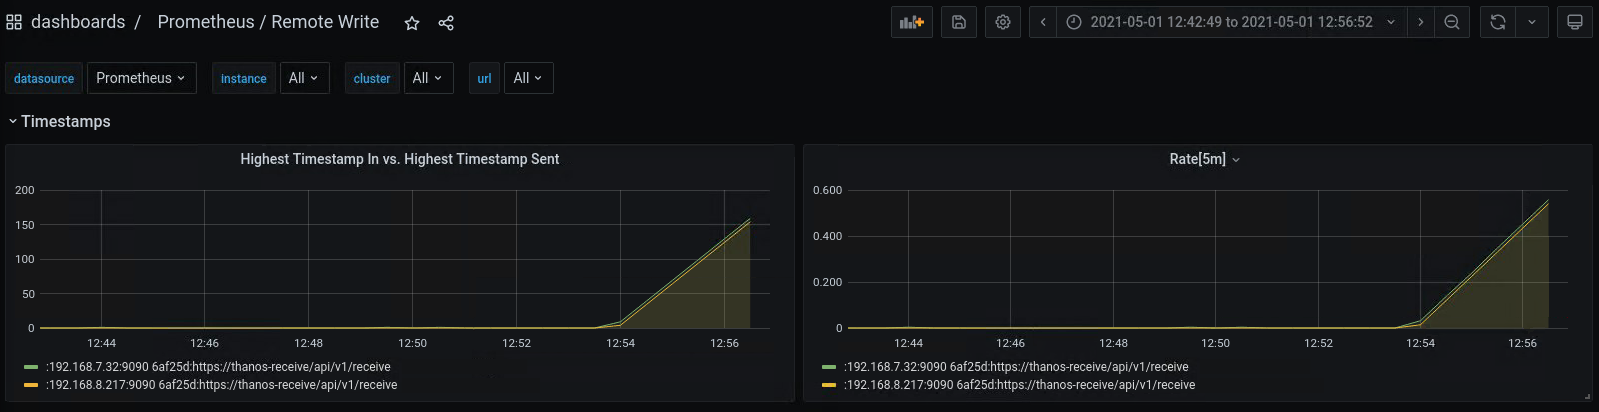 Example Grafana dashboard showing the falling-behind remote write case